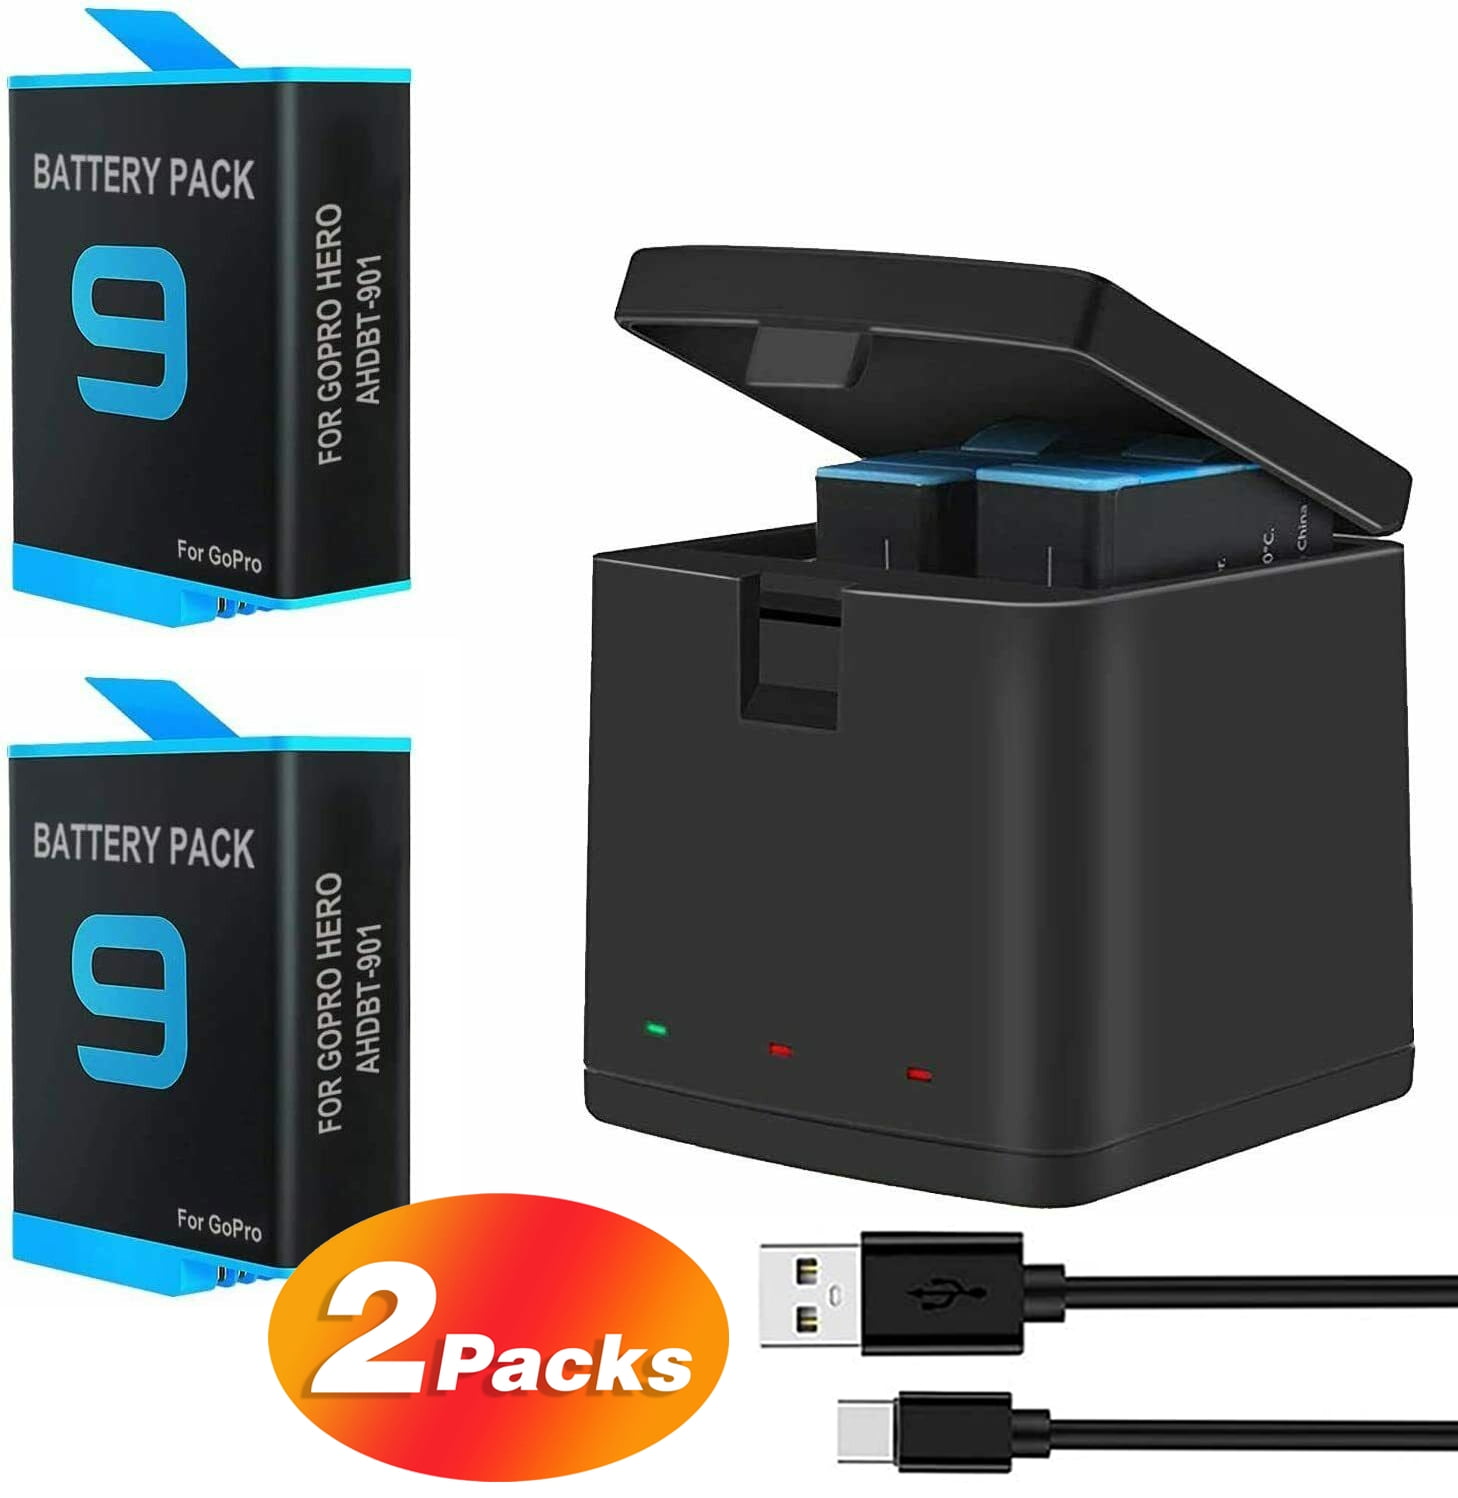 3 in 1 Battery Station for GoPro hero10 pro, 2 Pack Compatible with GoPro Hero 9 /10 Black AHDBT-901 - Walmart.com